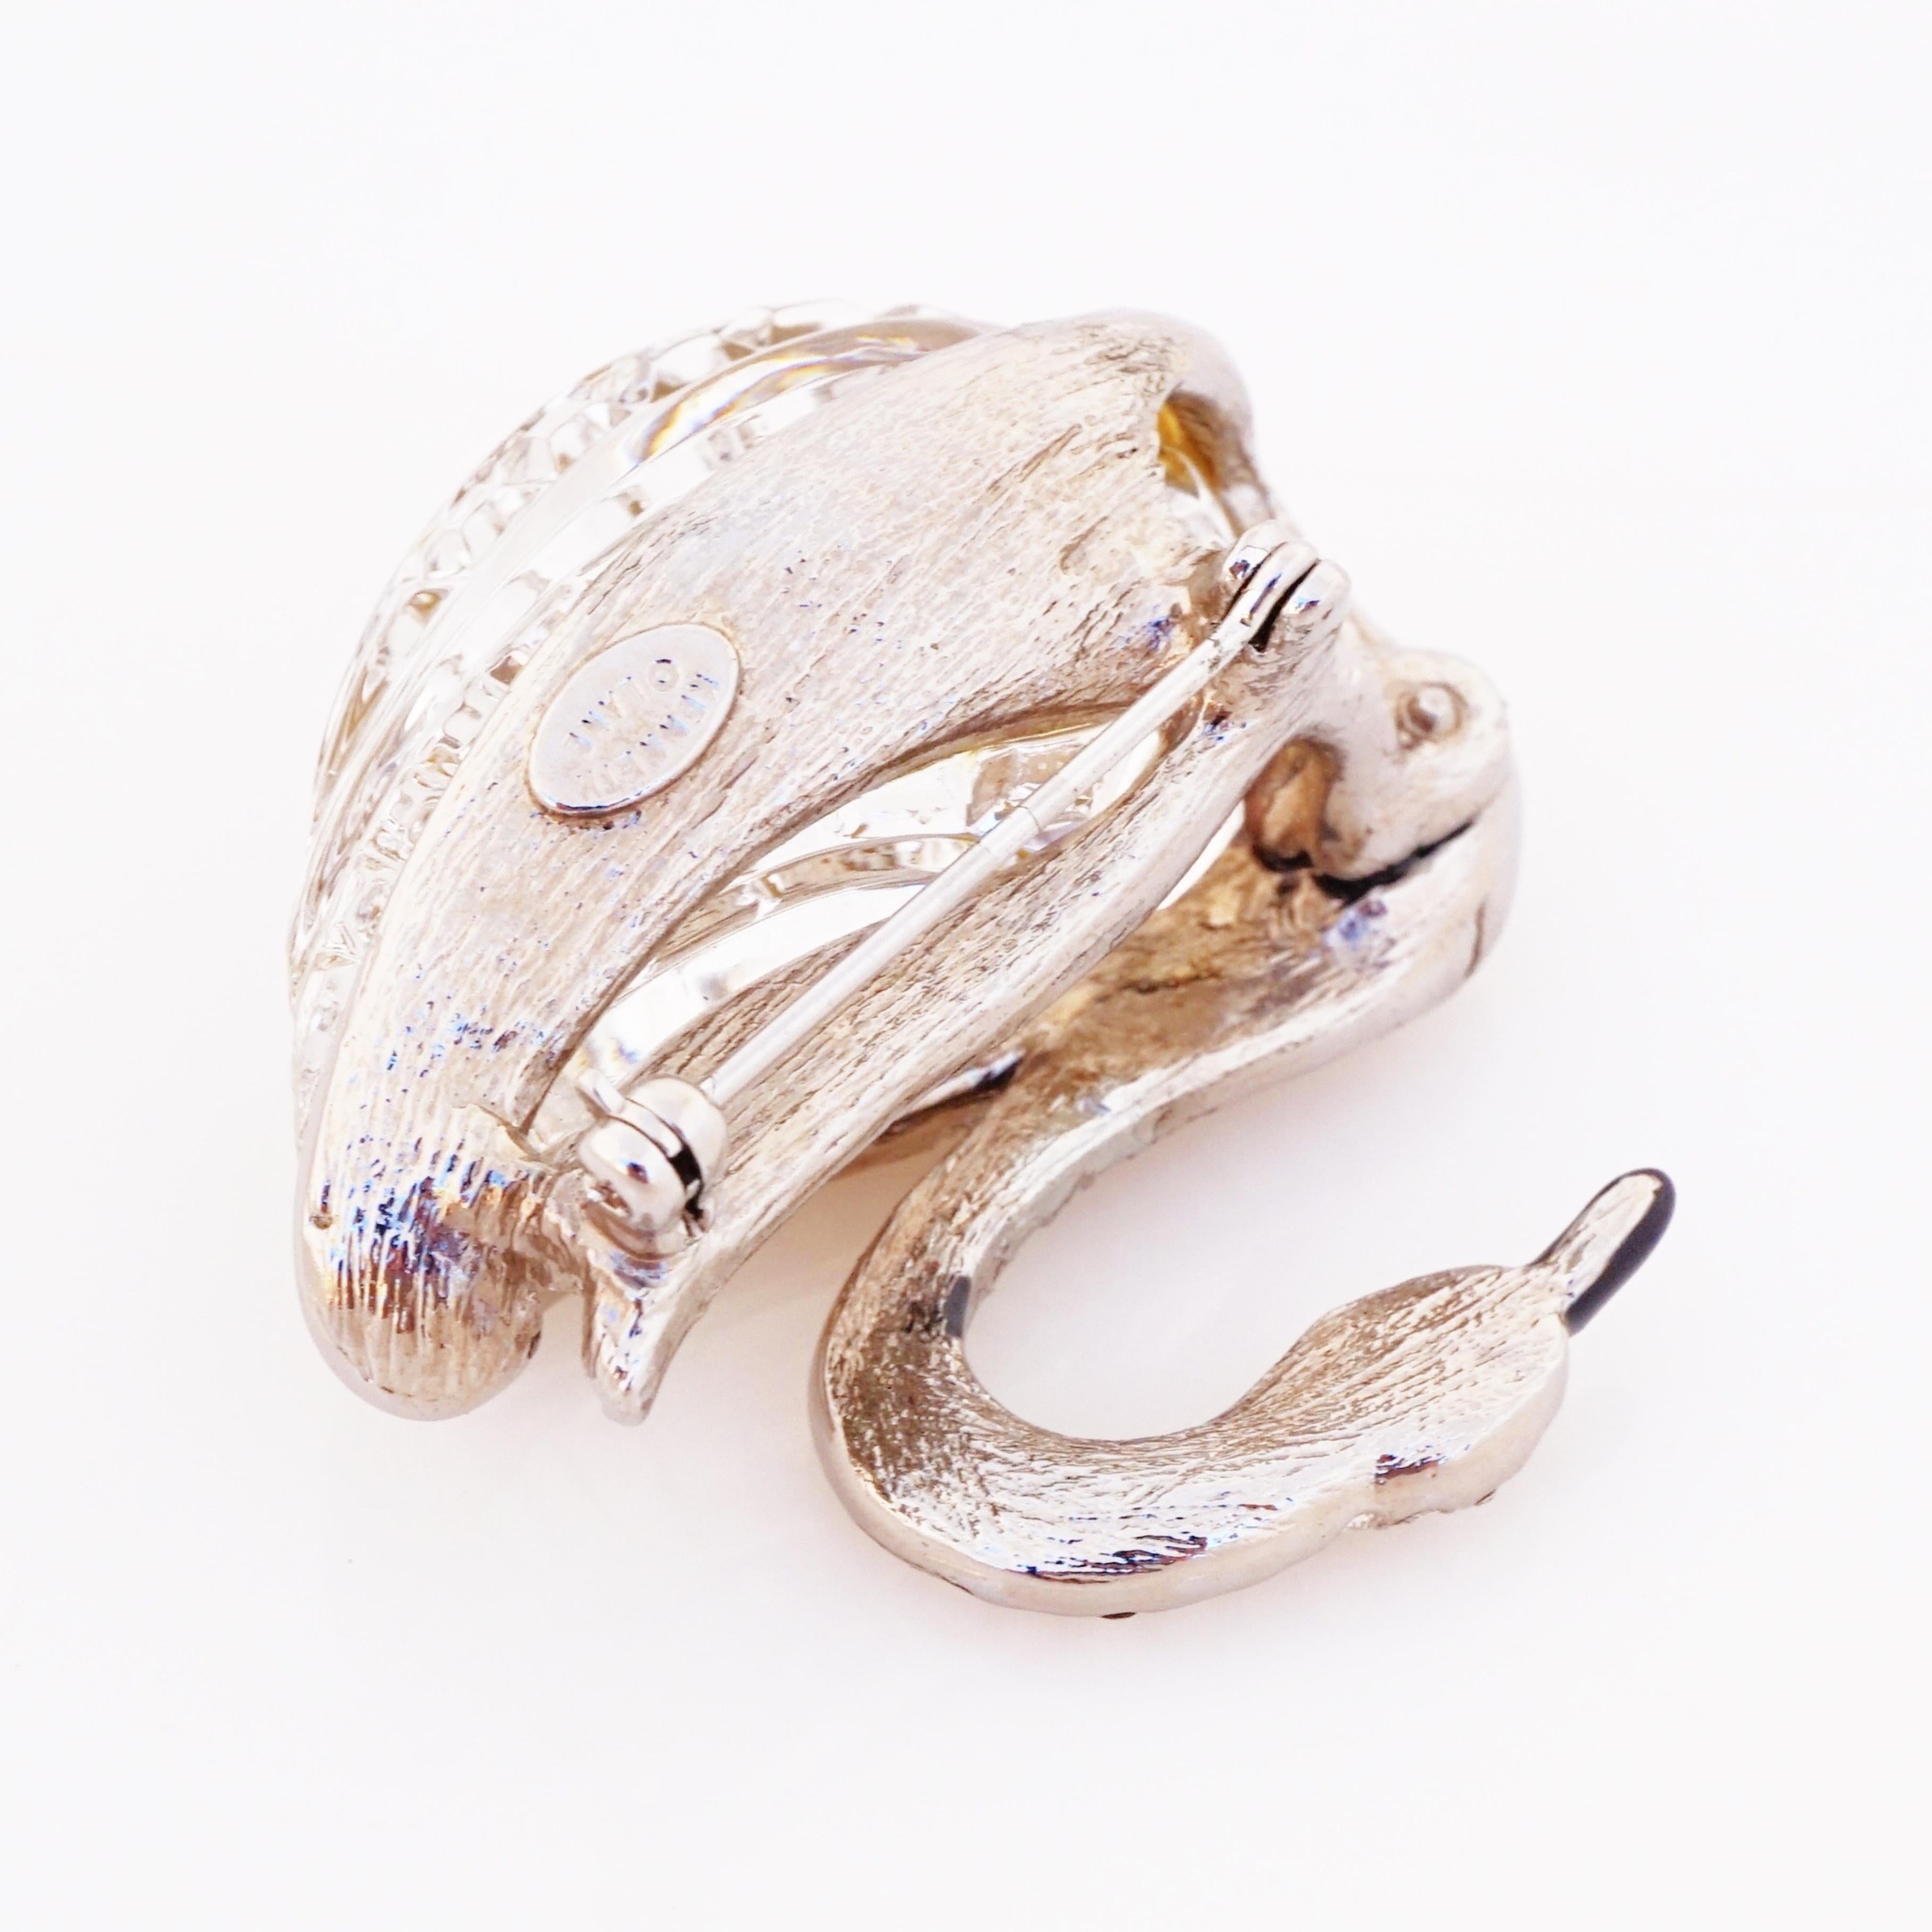 Crystal Pavé and Lucite Swan Brooch By Kenneth Jay Lane, 1980s For Sale 1